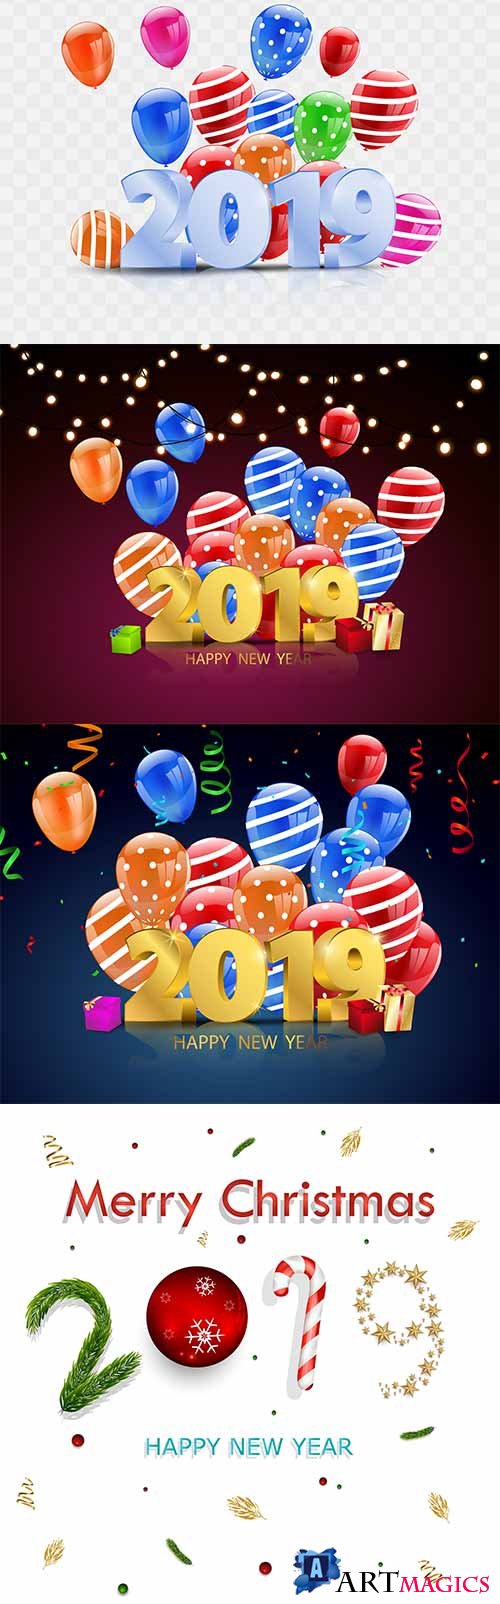   - 2019 -   / New Year - 2019 - Vector Graphics